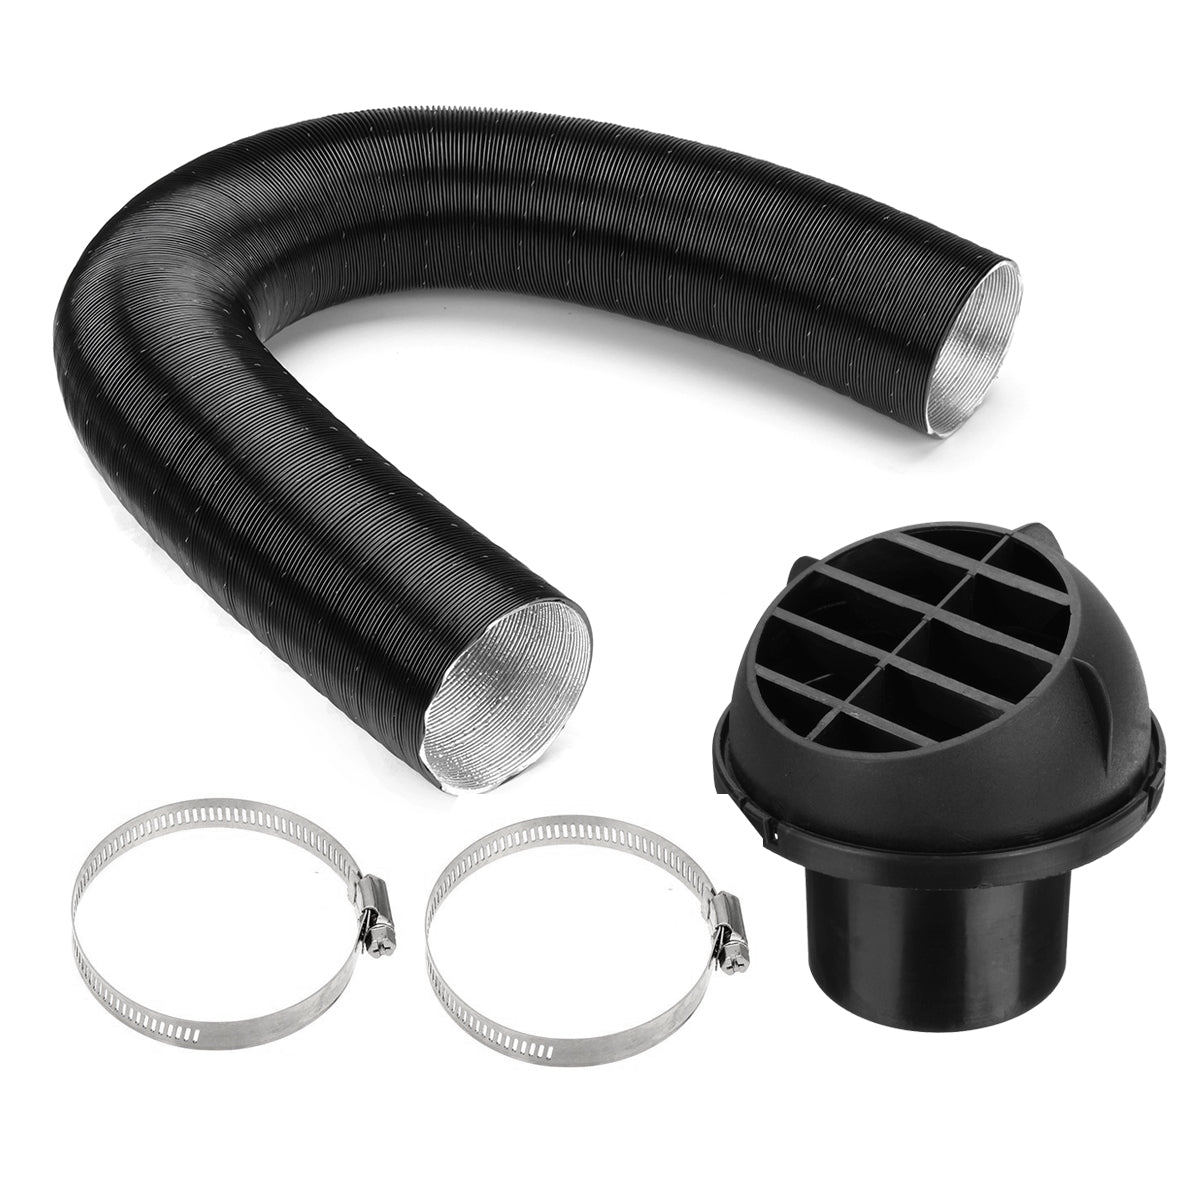 Black 60mm Heater Duct Pipe Air Outlet Vent Hose Clip For Eberspacher Diesel Heater